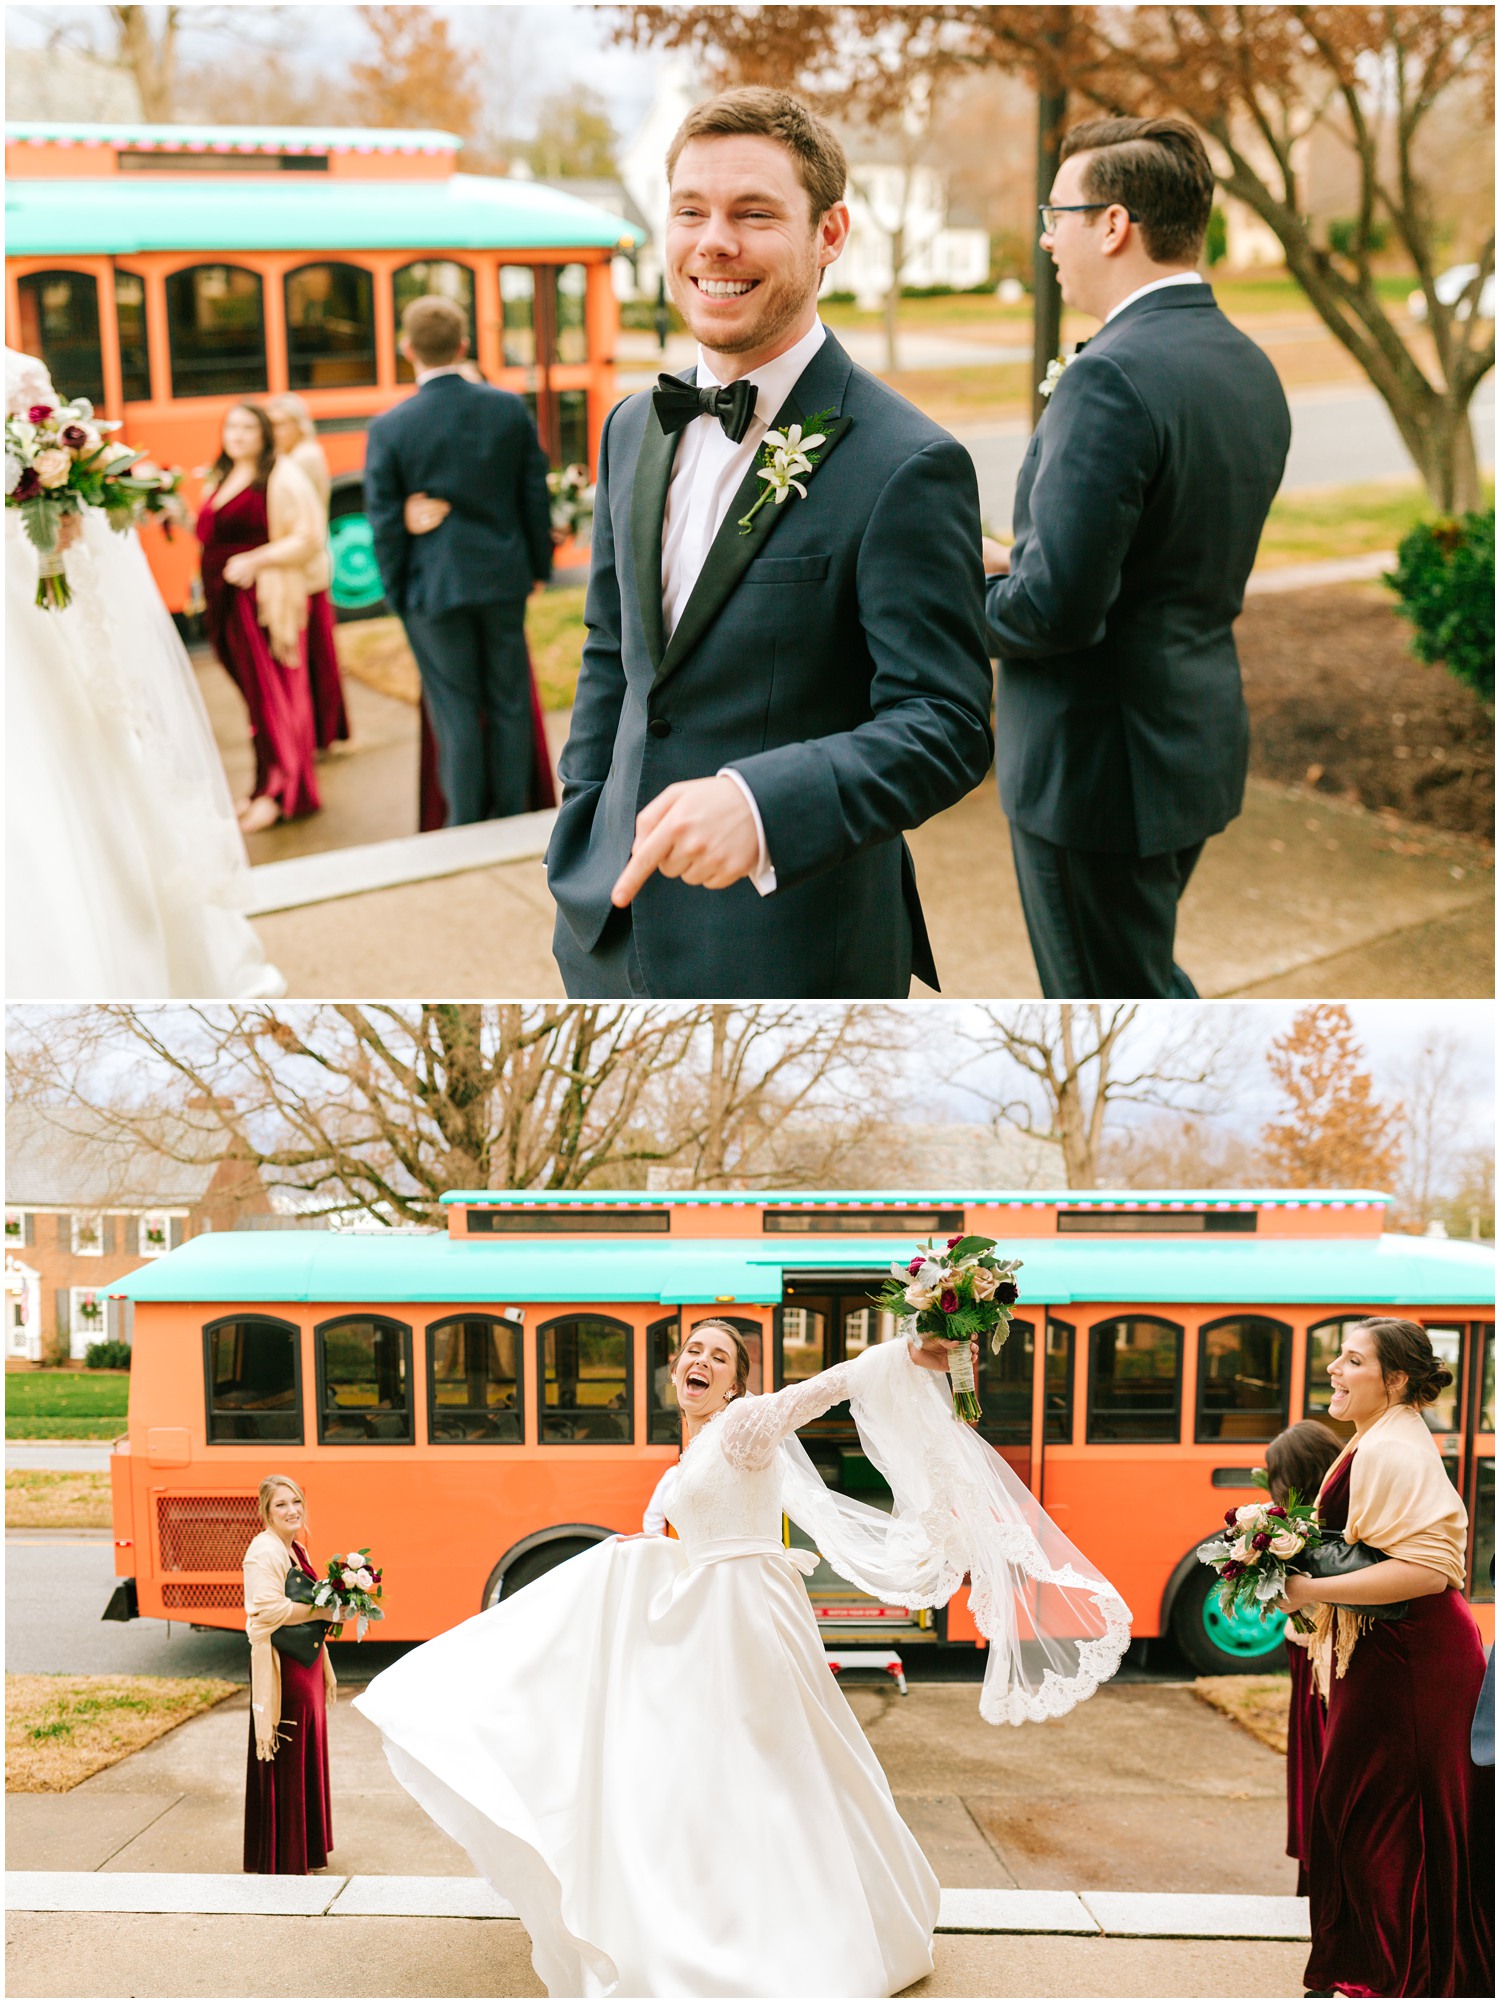 bride, groom, and bridal party board trolley to take photos with Chelsea Renay Photography